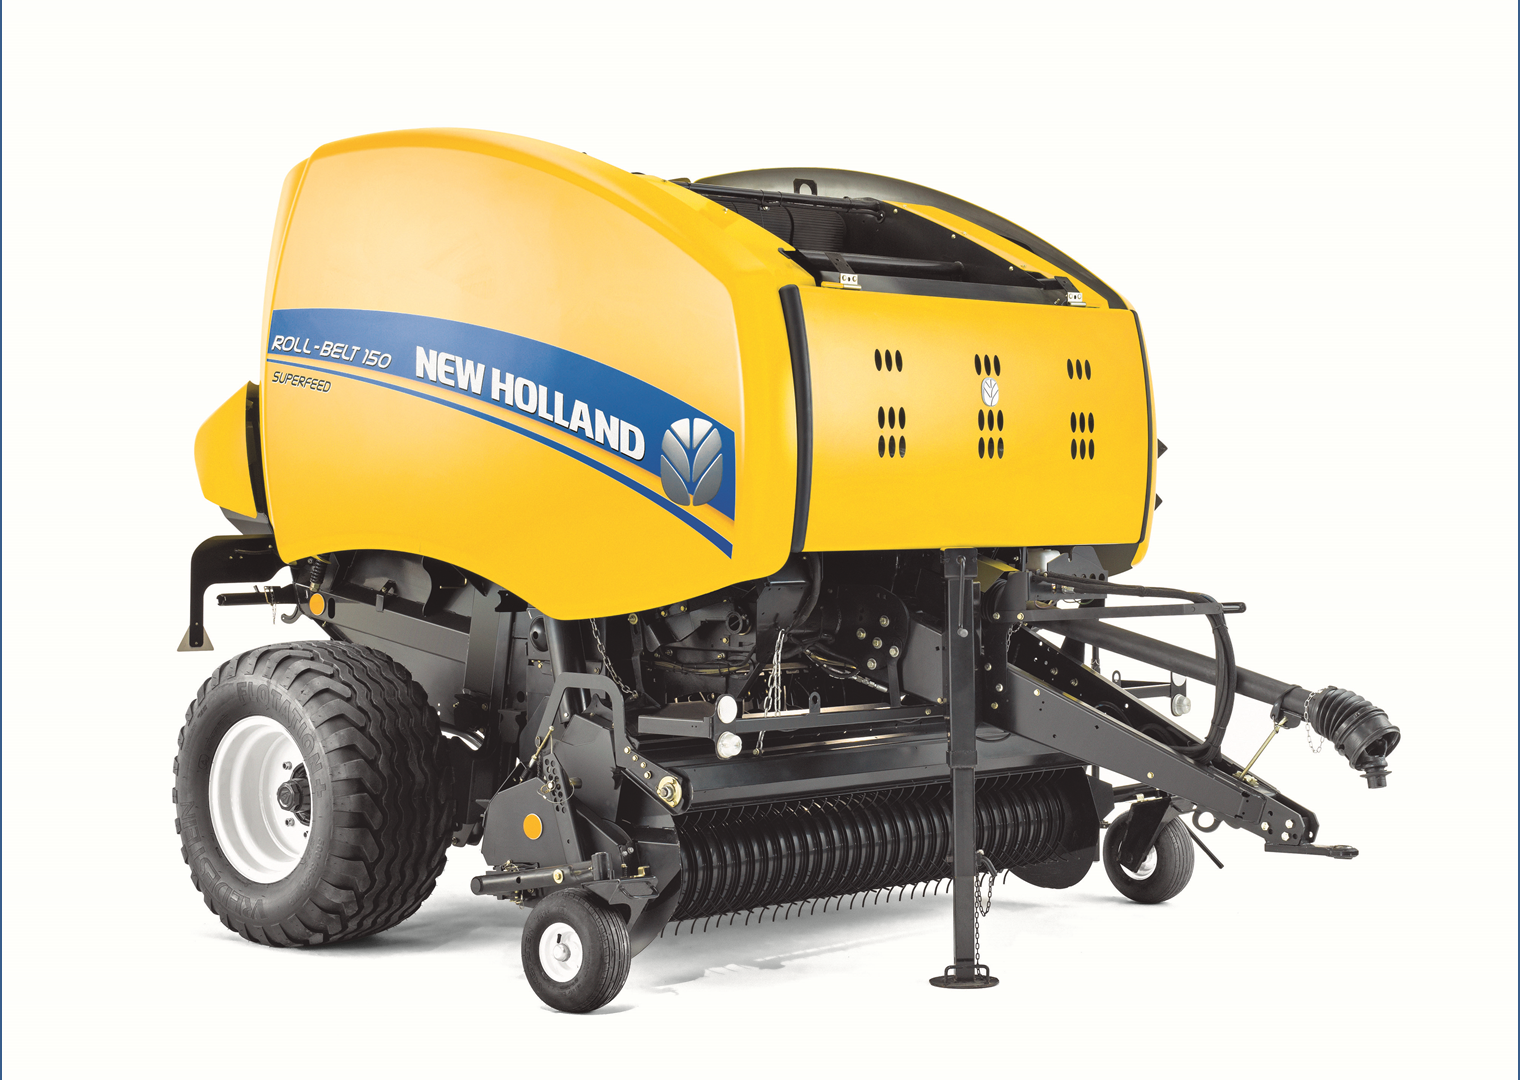 New Holland Agriculture upgrades its Roll-Belt variable chamber balers